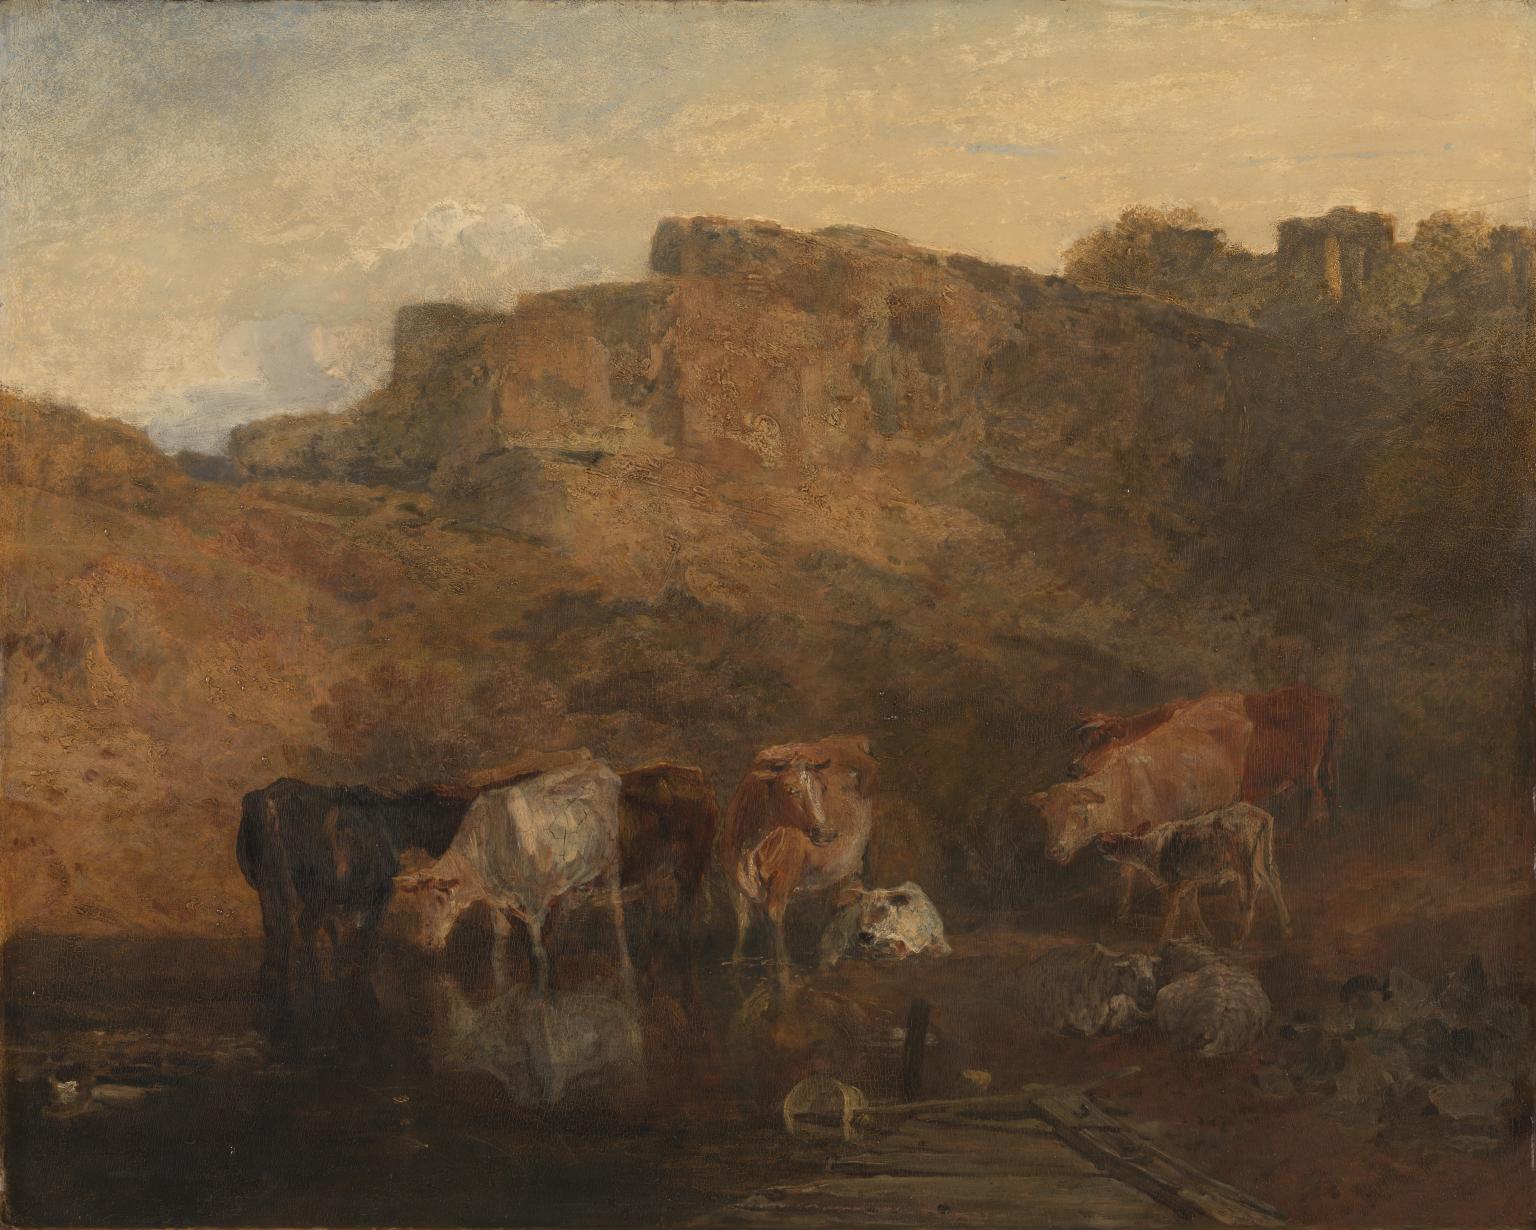 N00487: The Quiet Ruin, Cattle in Water; A Sketch, Evening